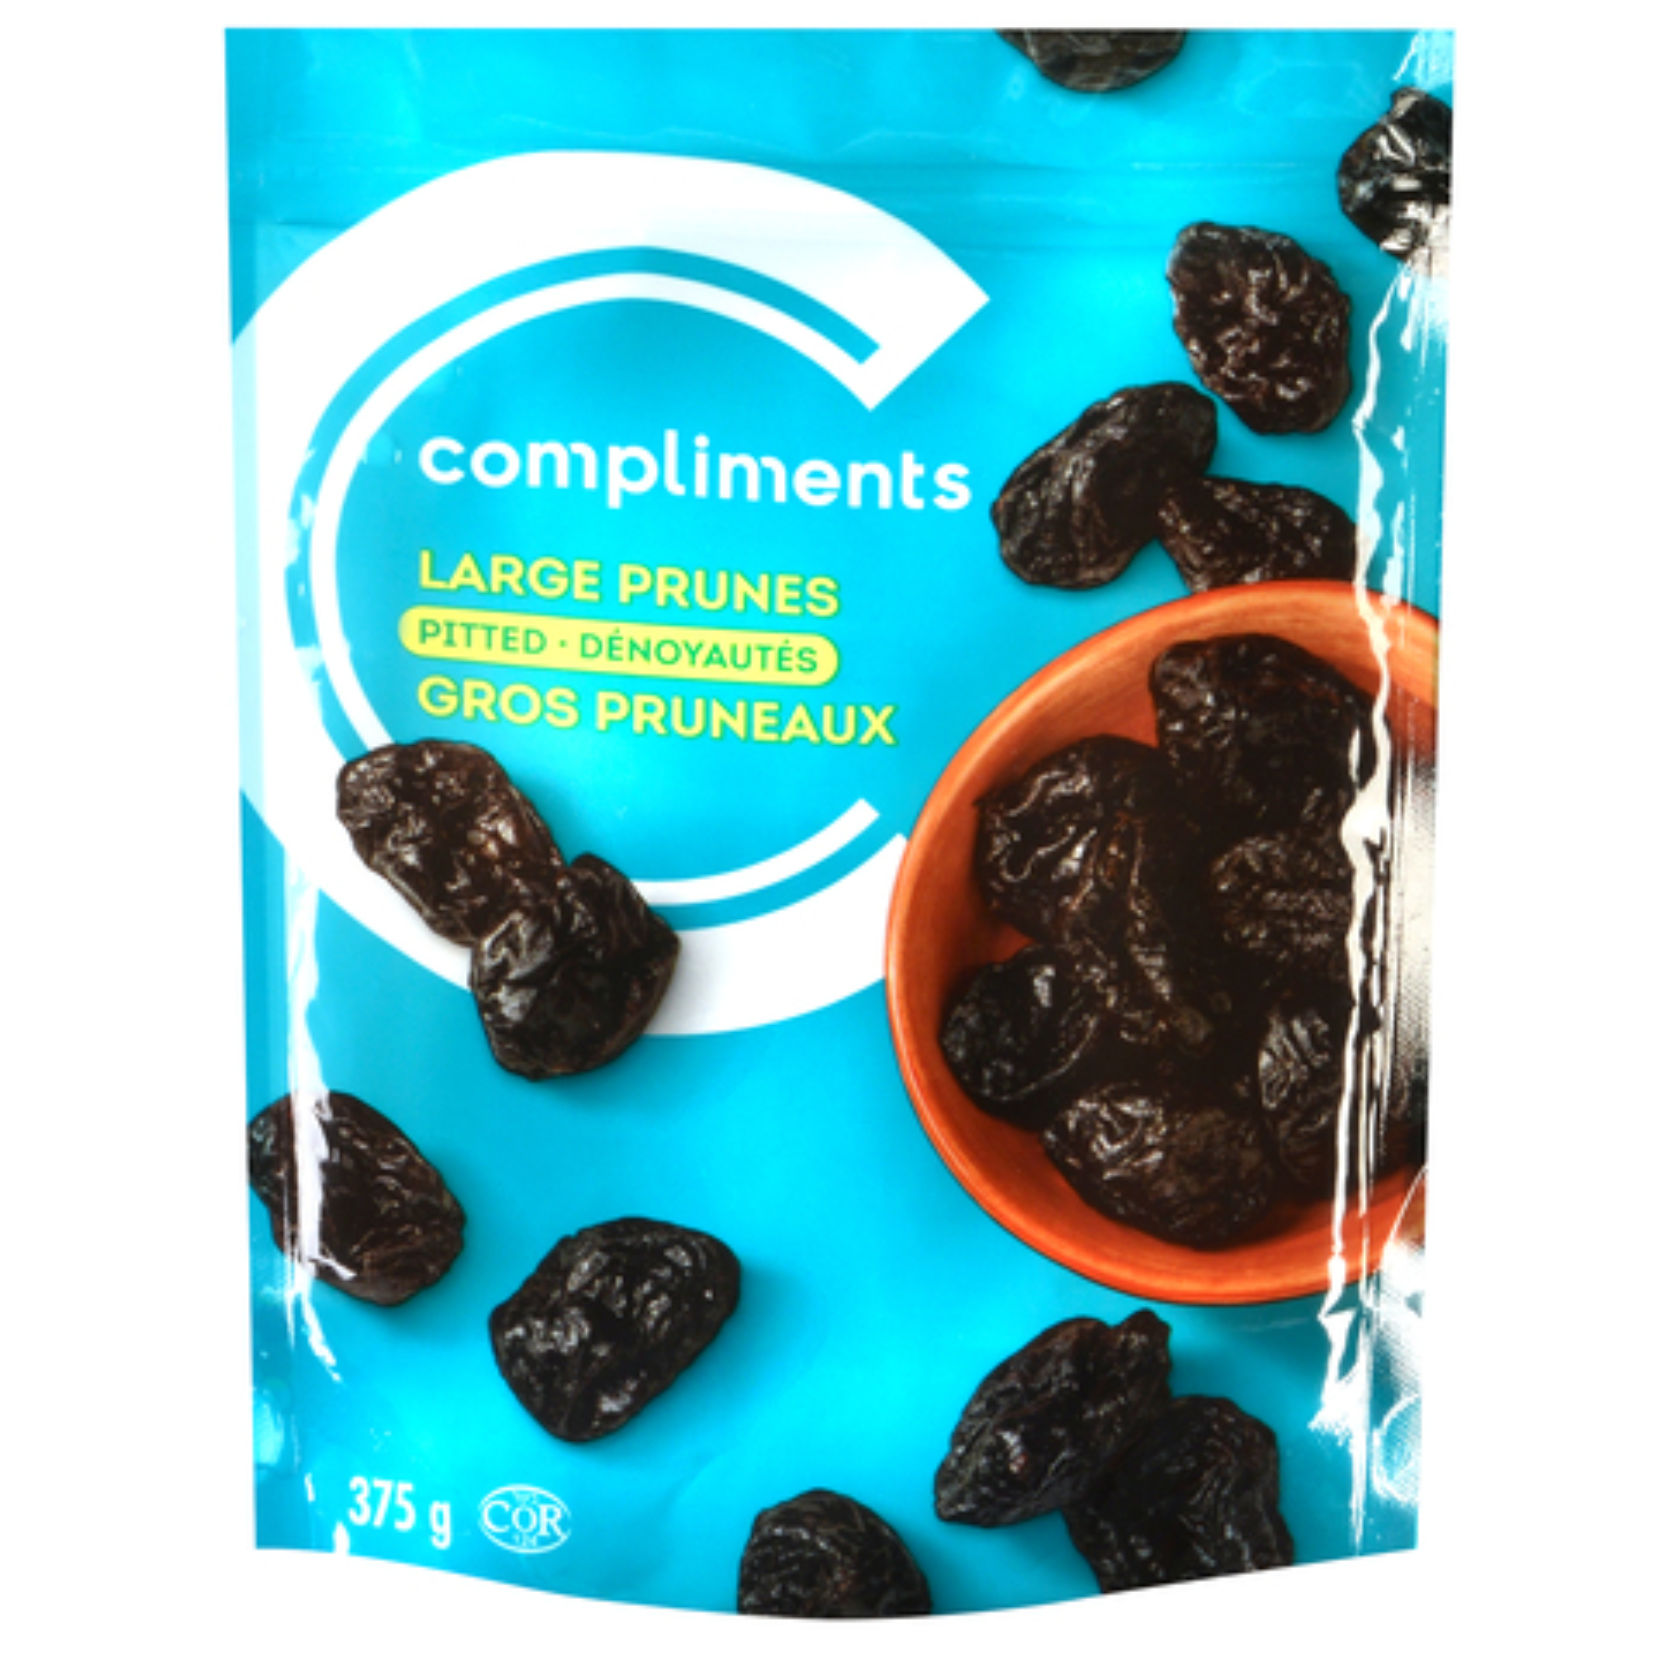 Compliments Pitted Prunes 375g